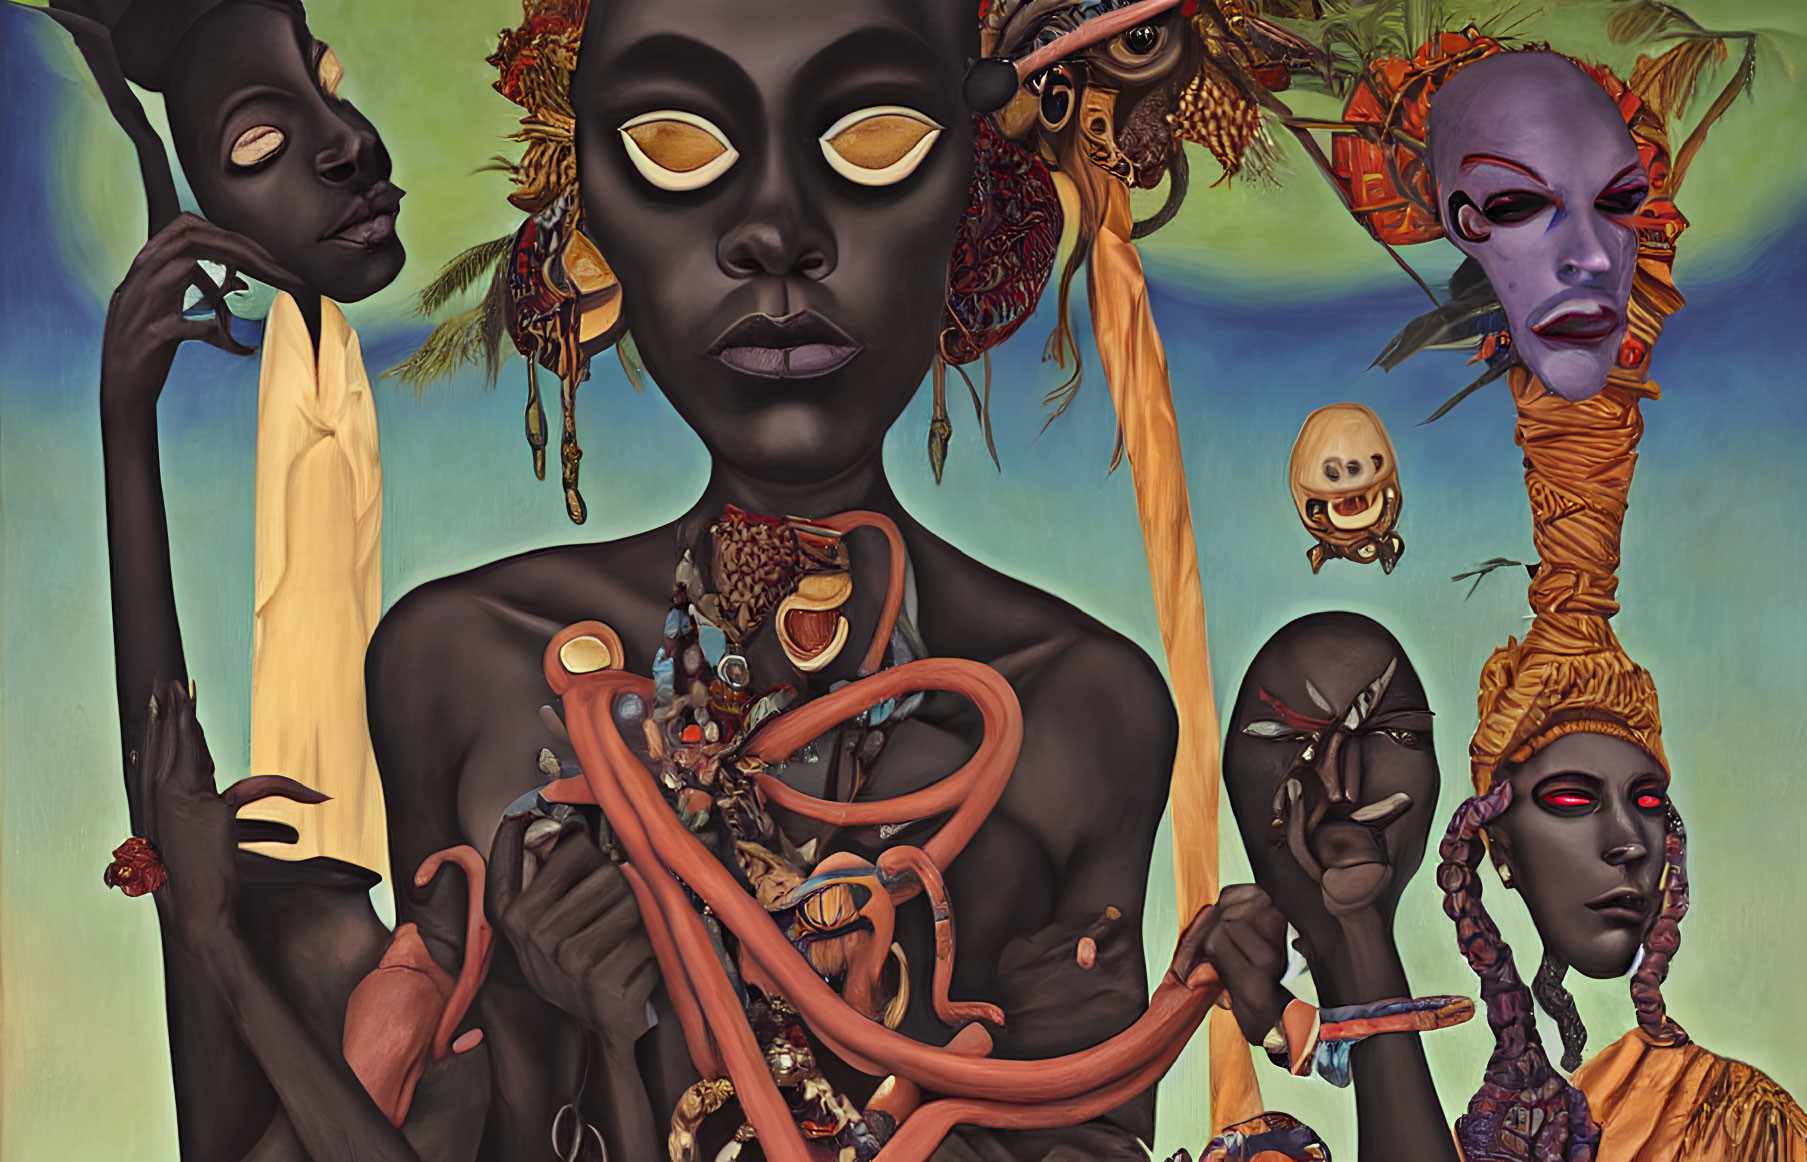 Surreal painting: Multiple faces in earthy tones with jewelry and headdresses, some with stretched